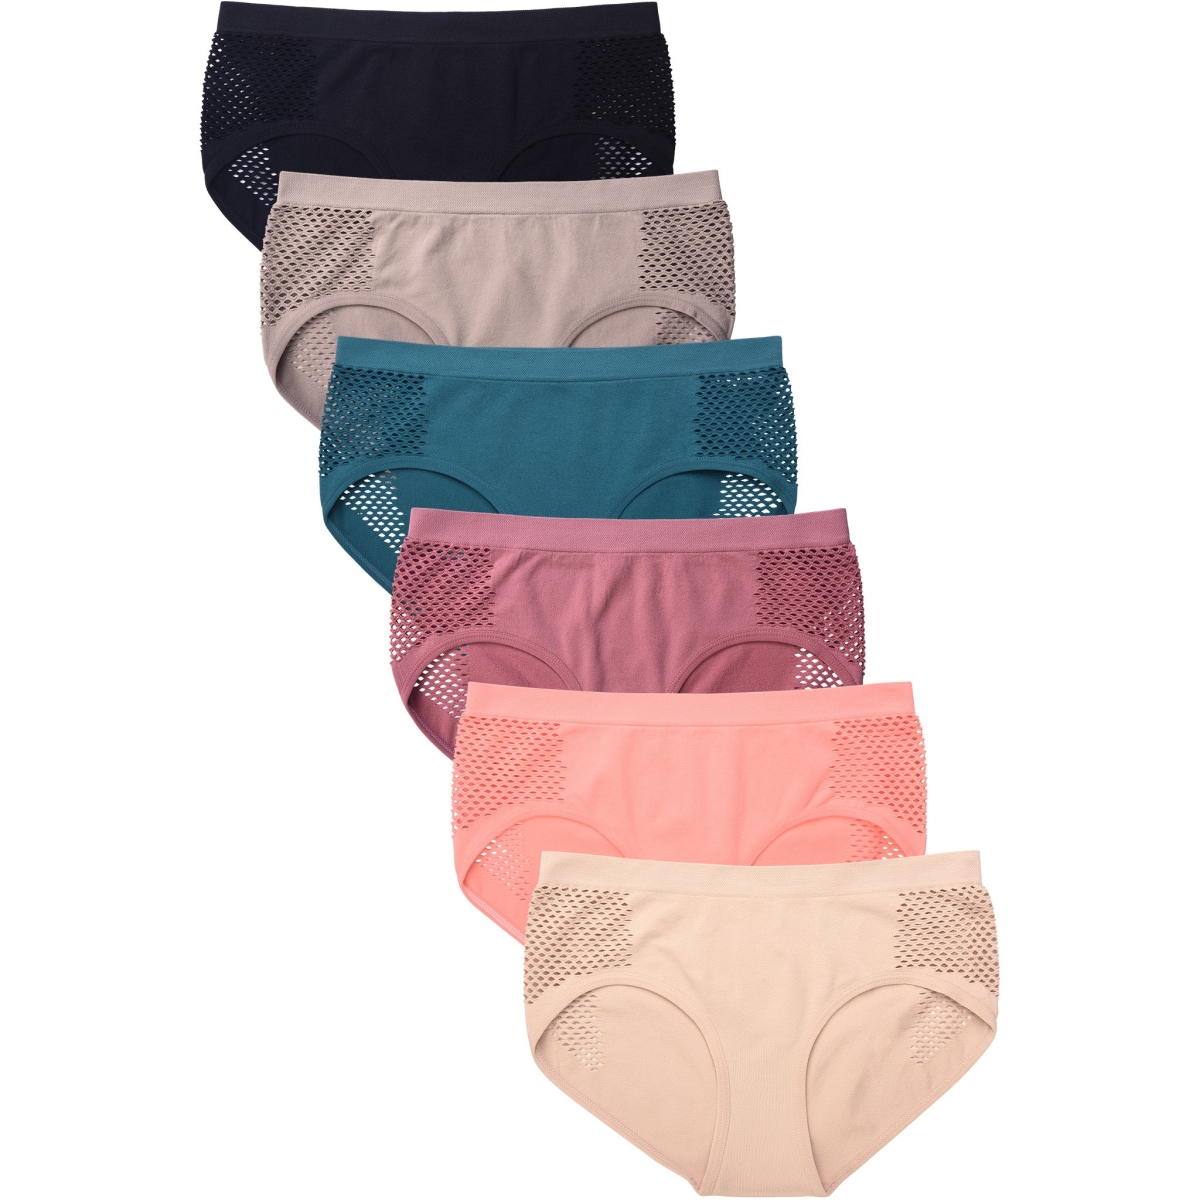 Picture of 247 Frenzy 247-LP0237SH4-OS Sofra Womens Essentials Nylon Stretch Seamless Hipster Panty Underwear - Assorted Color - Pack of 6